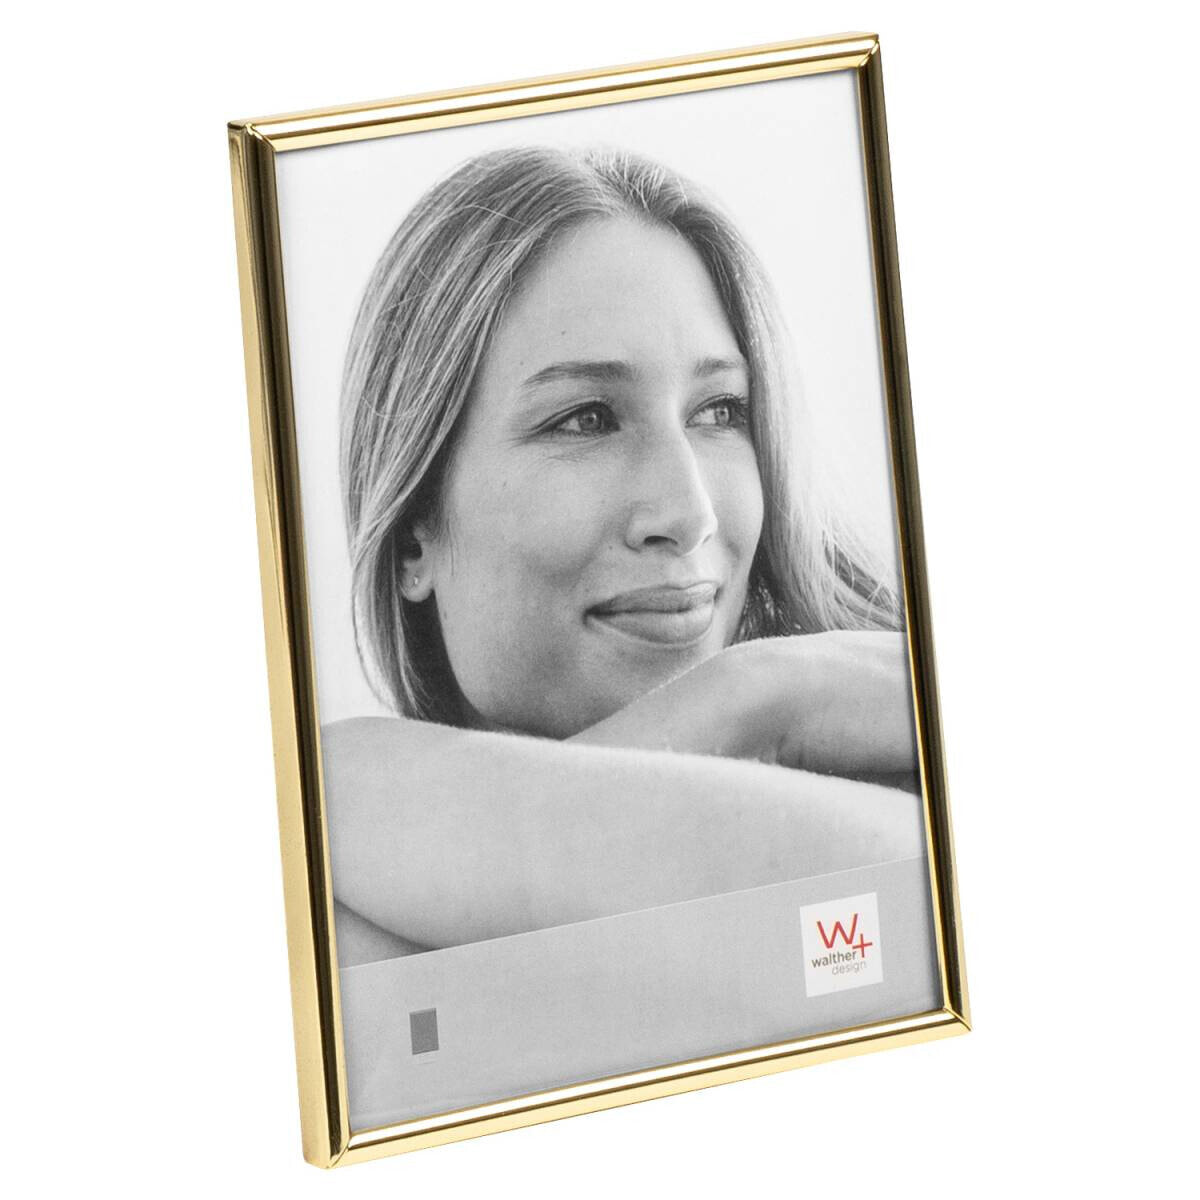 walther design WD318G - Metal - Gold - Single picture frame - 13 x 18 cm - Rectangular - Germany